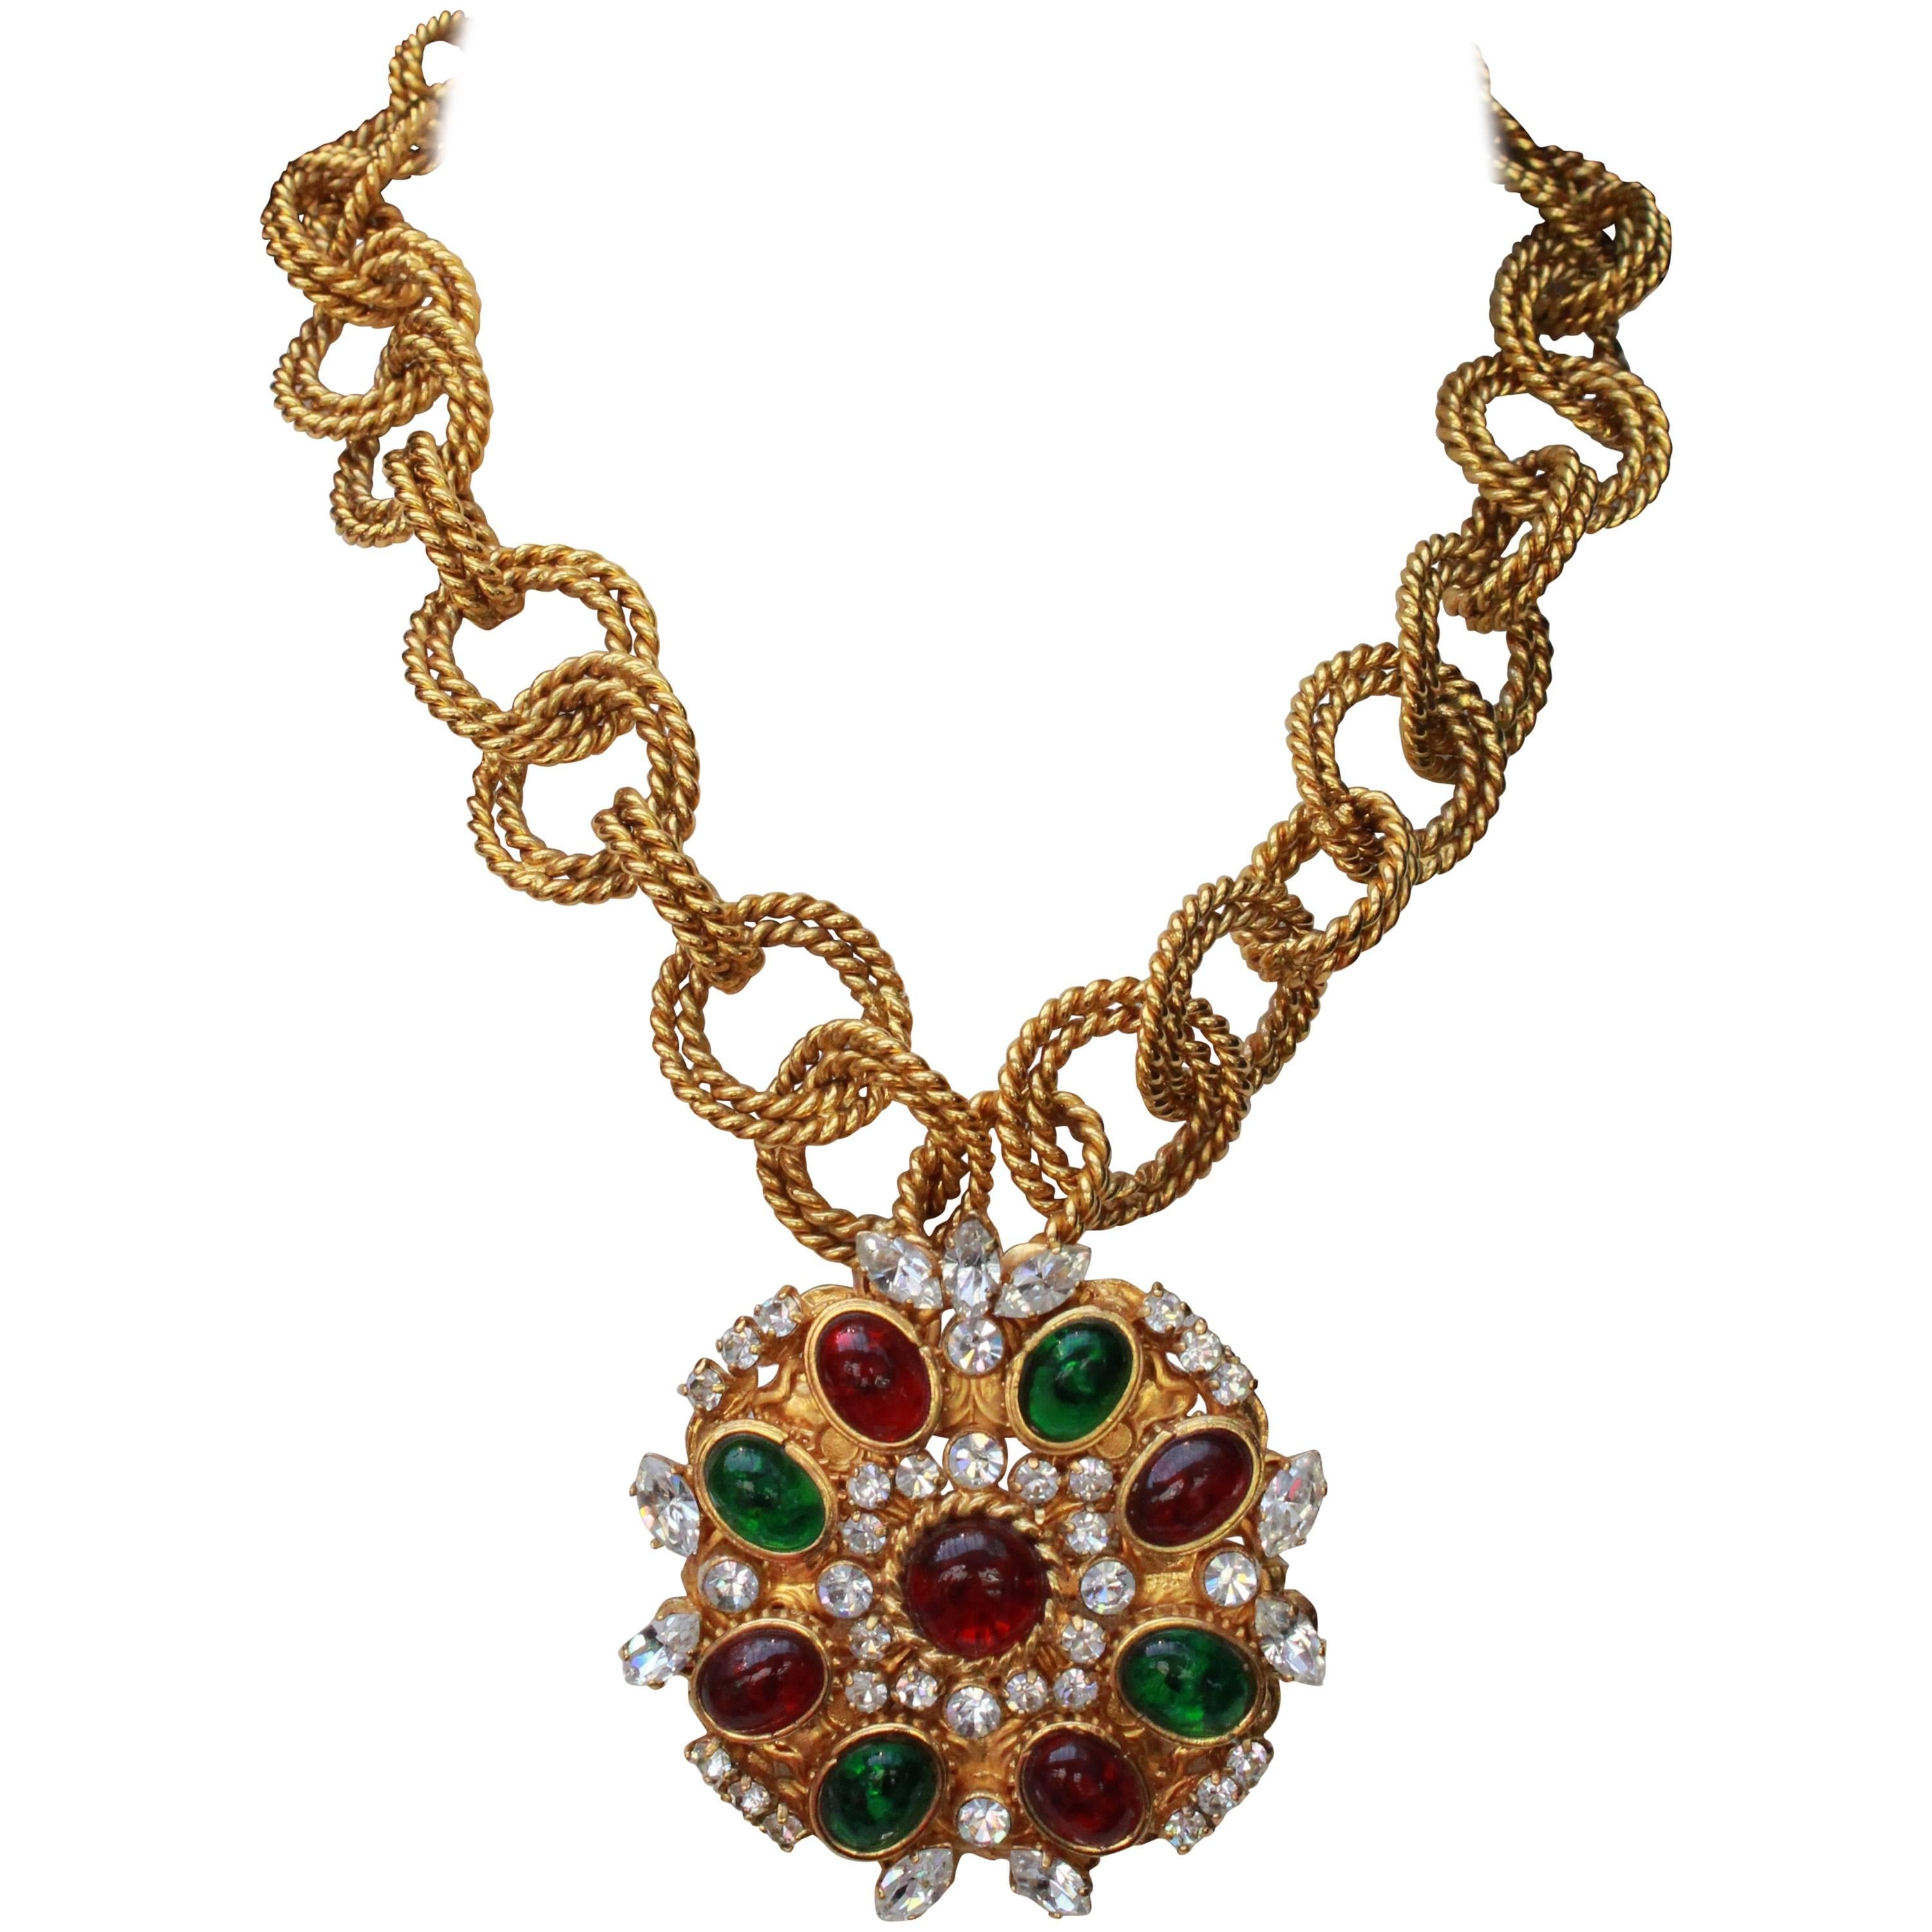 1990s Chanel gilded metal short necklace composed of large chain and a pendant